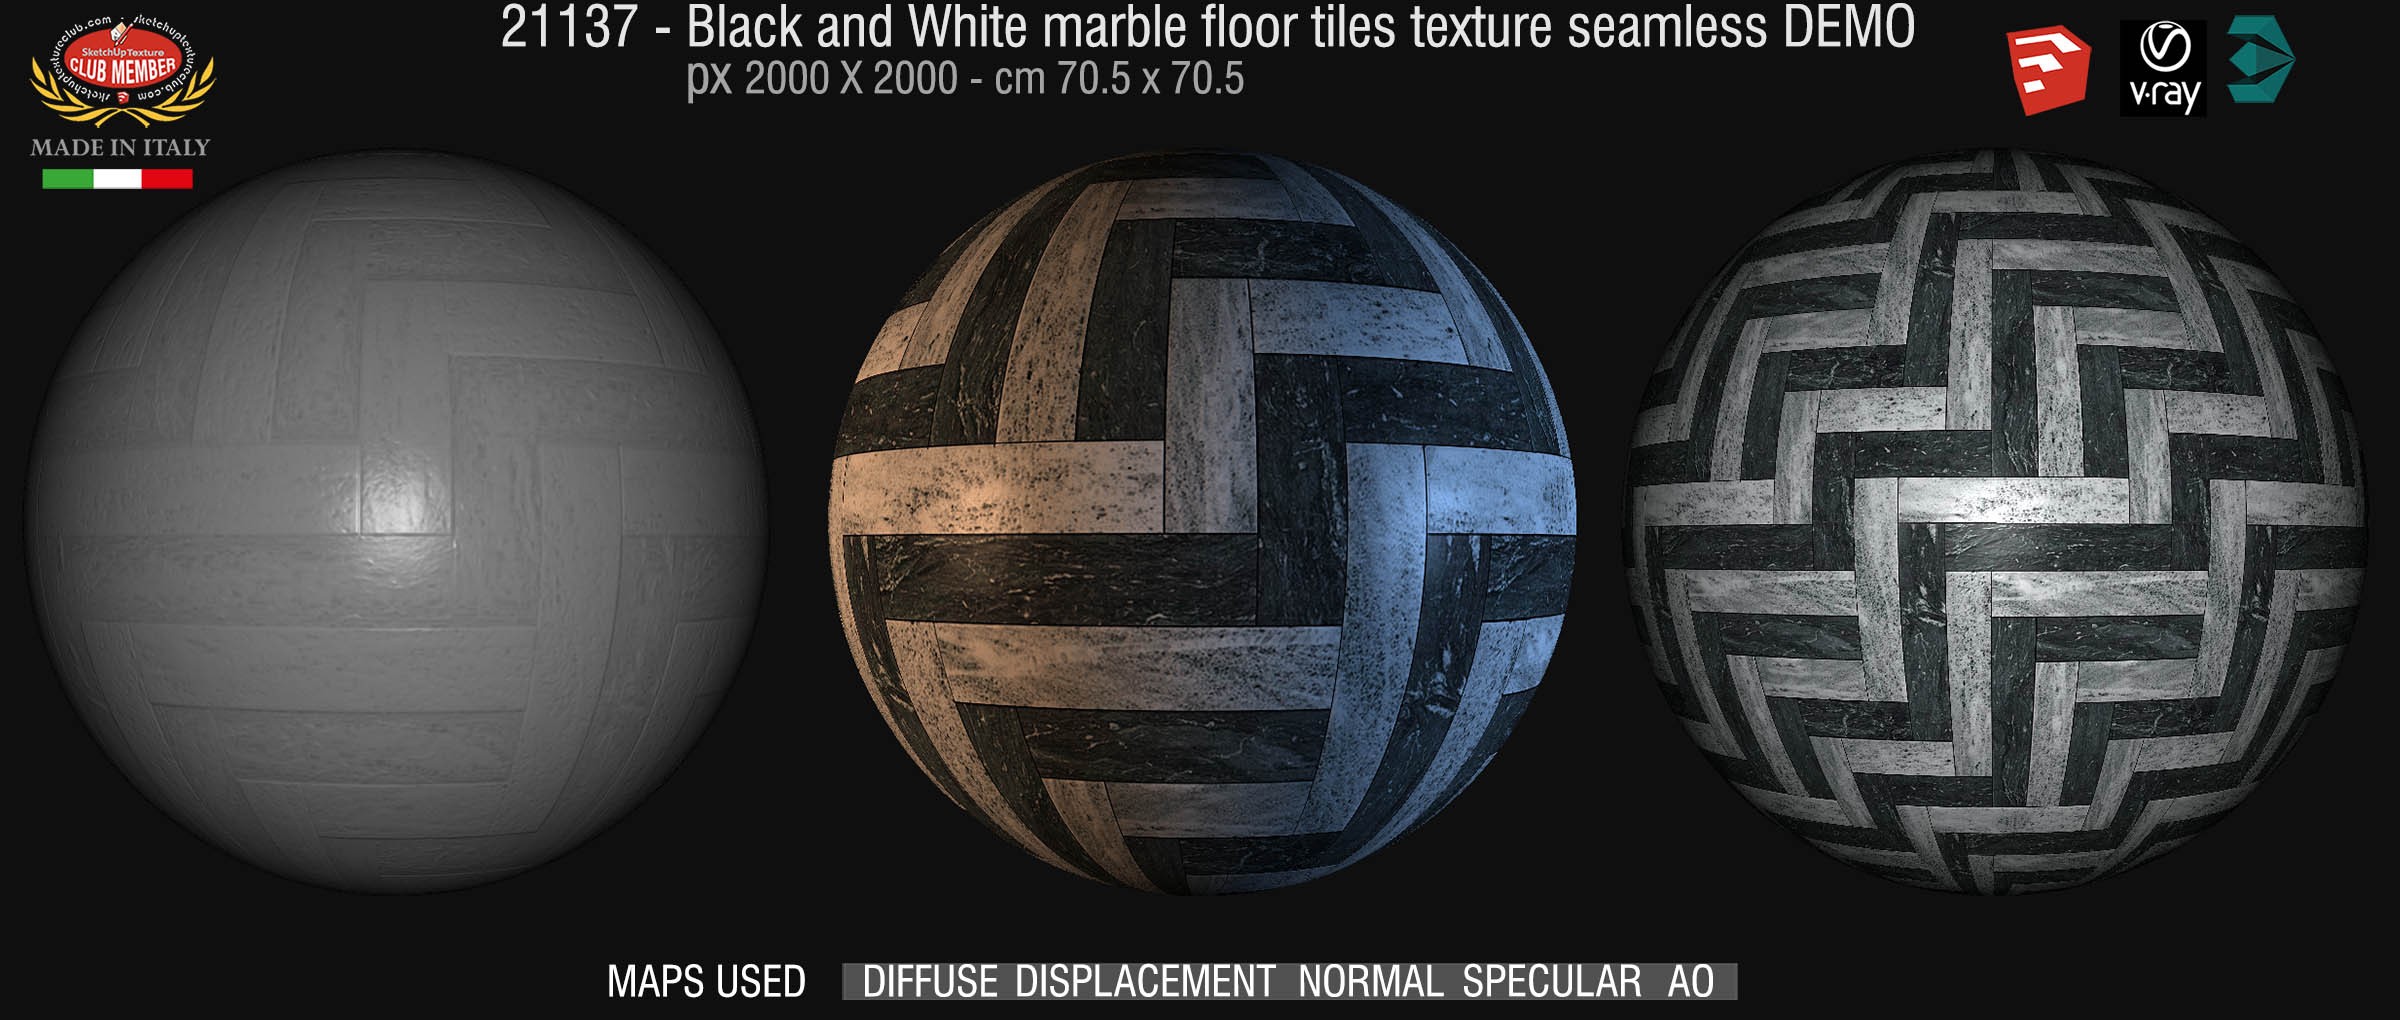 21137 Black and white marble tile texture seamless + maps DEMO